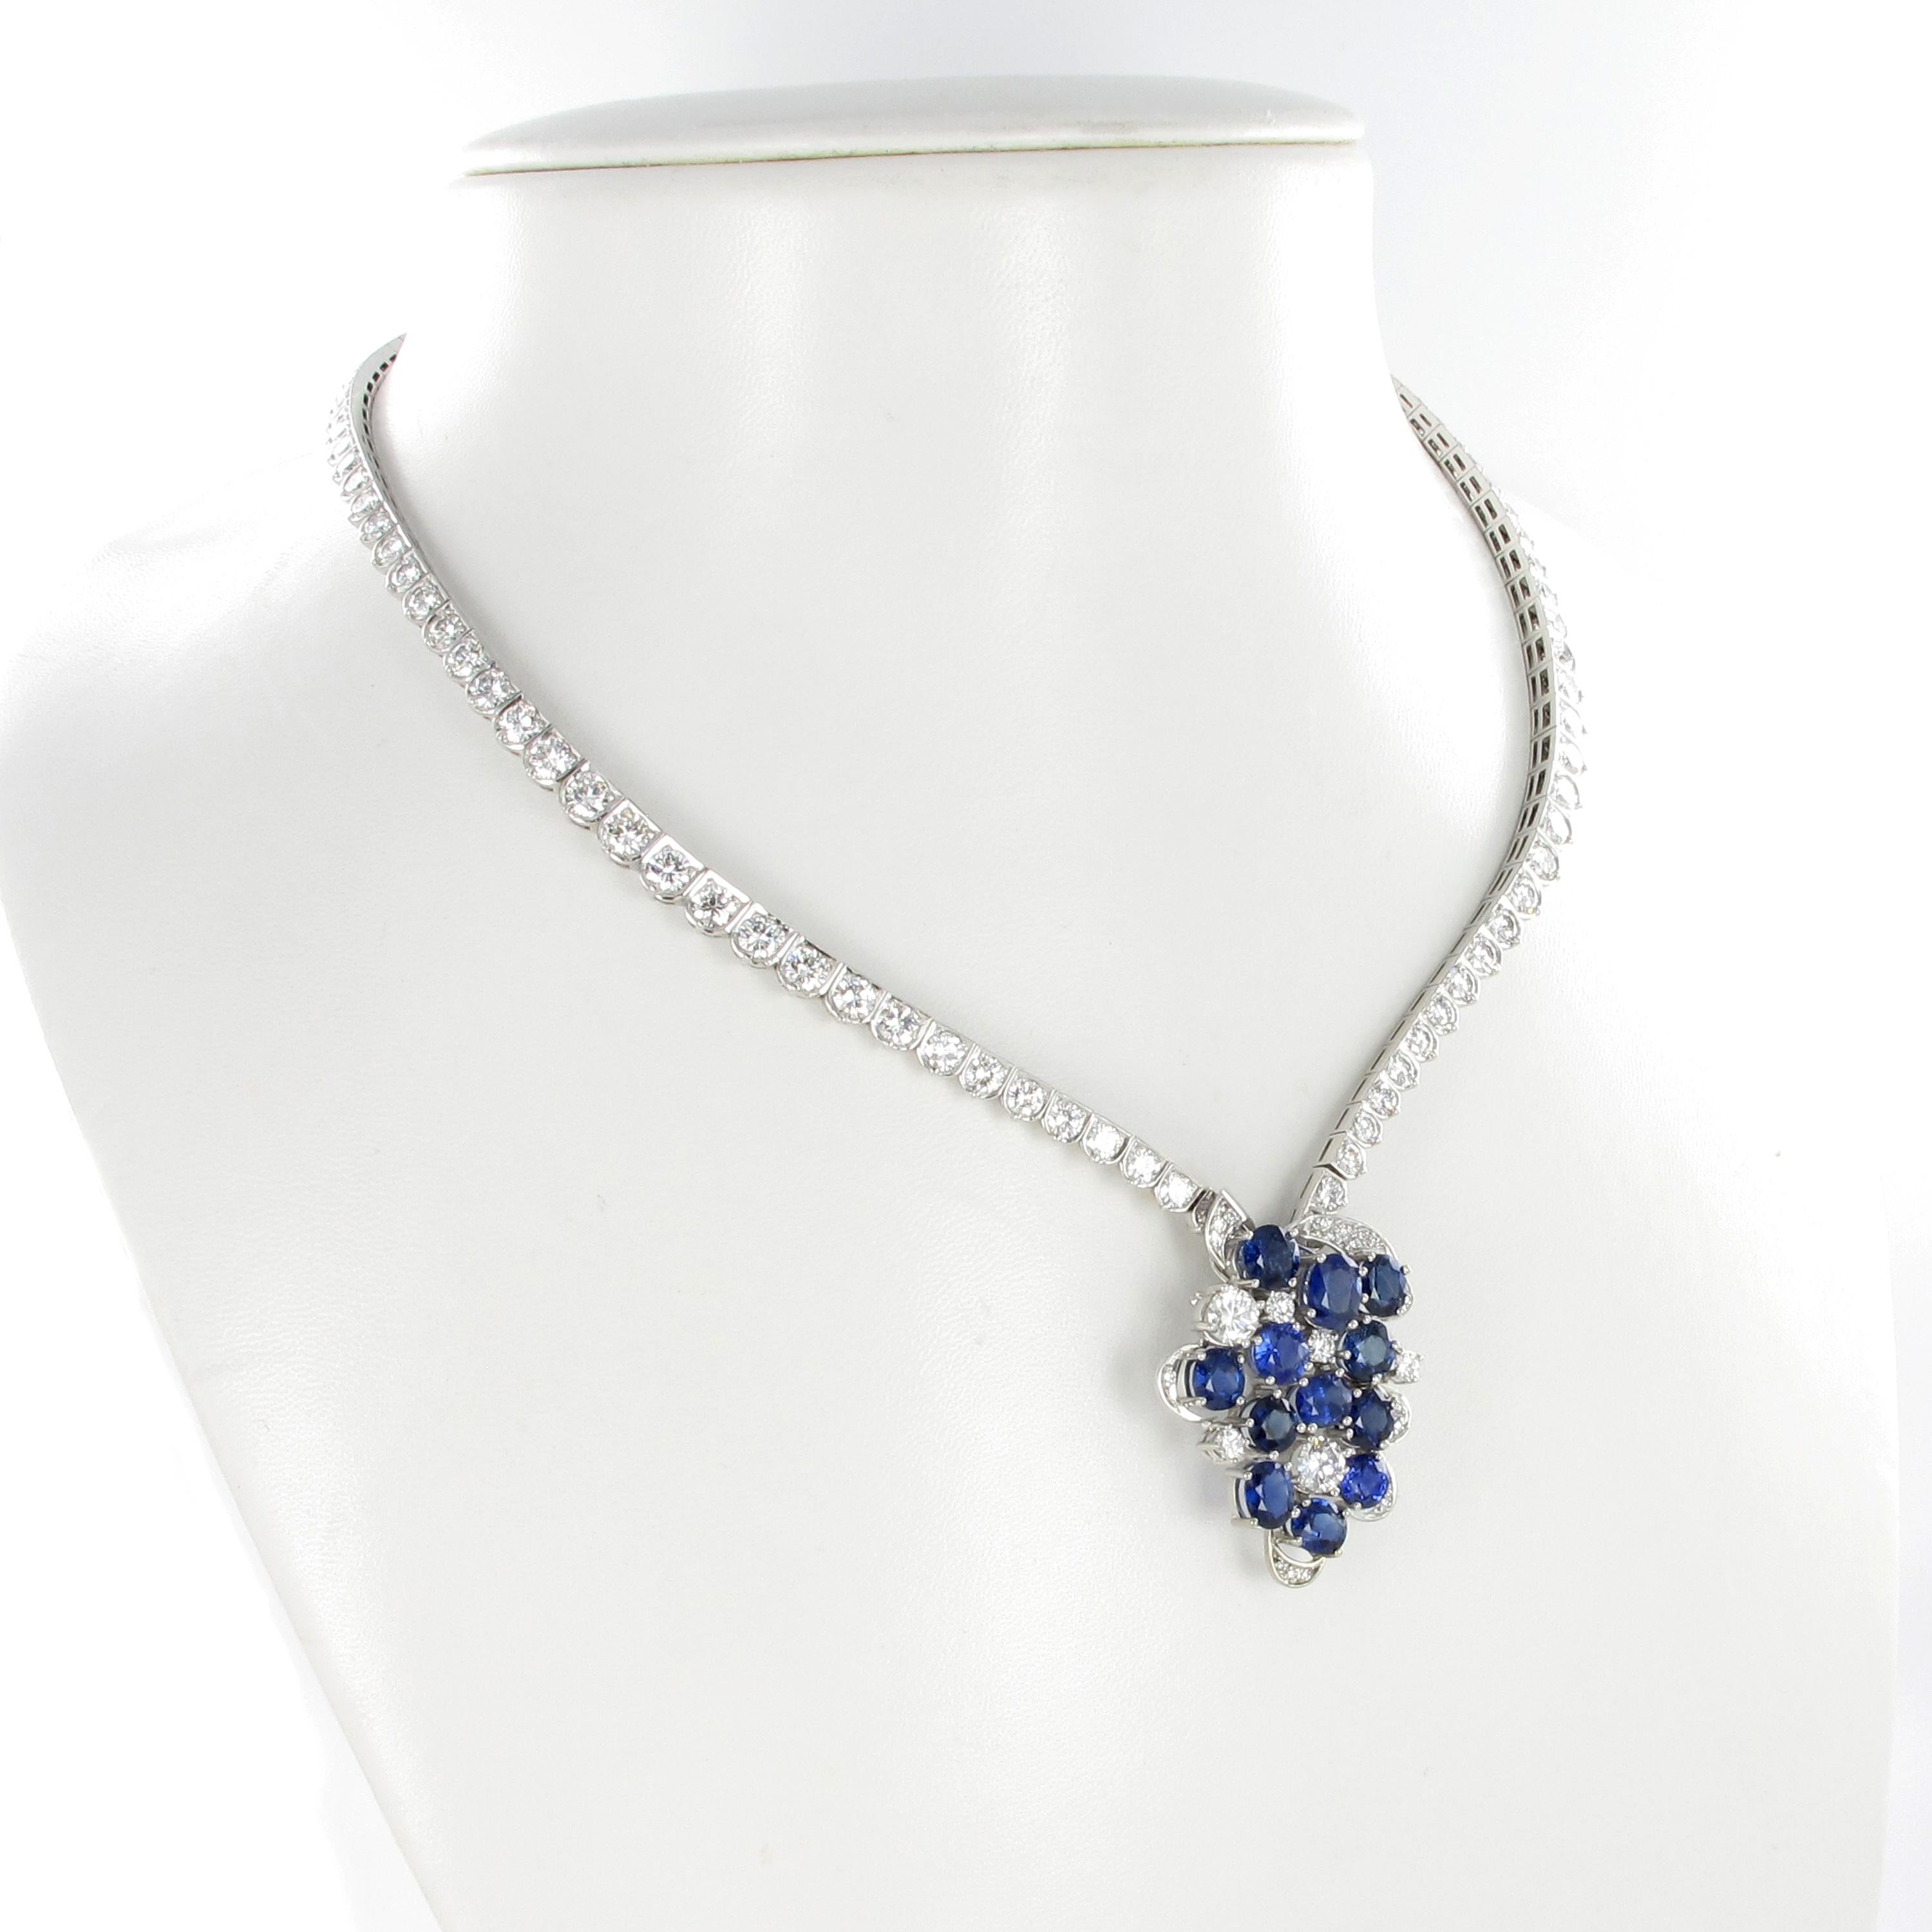 This beautiful necklace is handcrafted in 950 platinum and set with 12 oval shaped and lively colored sapphires, total weight approximately 11.00 carats.
In addition, pendant and necklace are set with 135 brilliant-cut diamonds of G/H color and